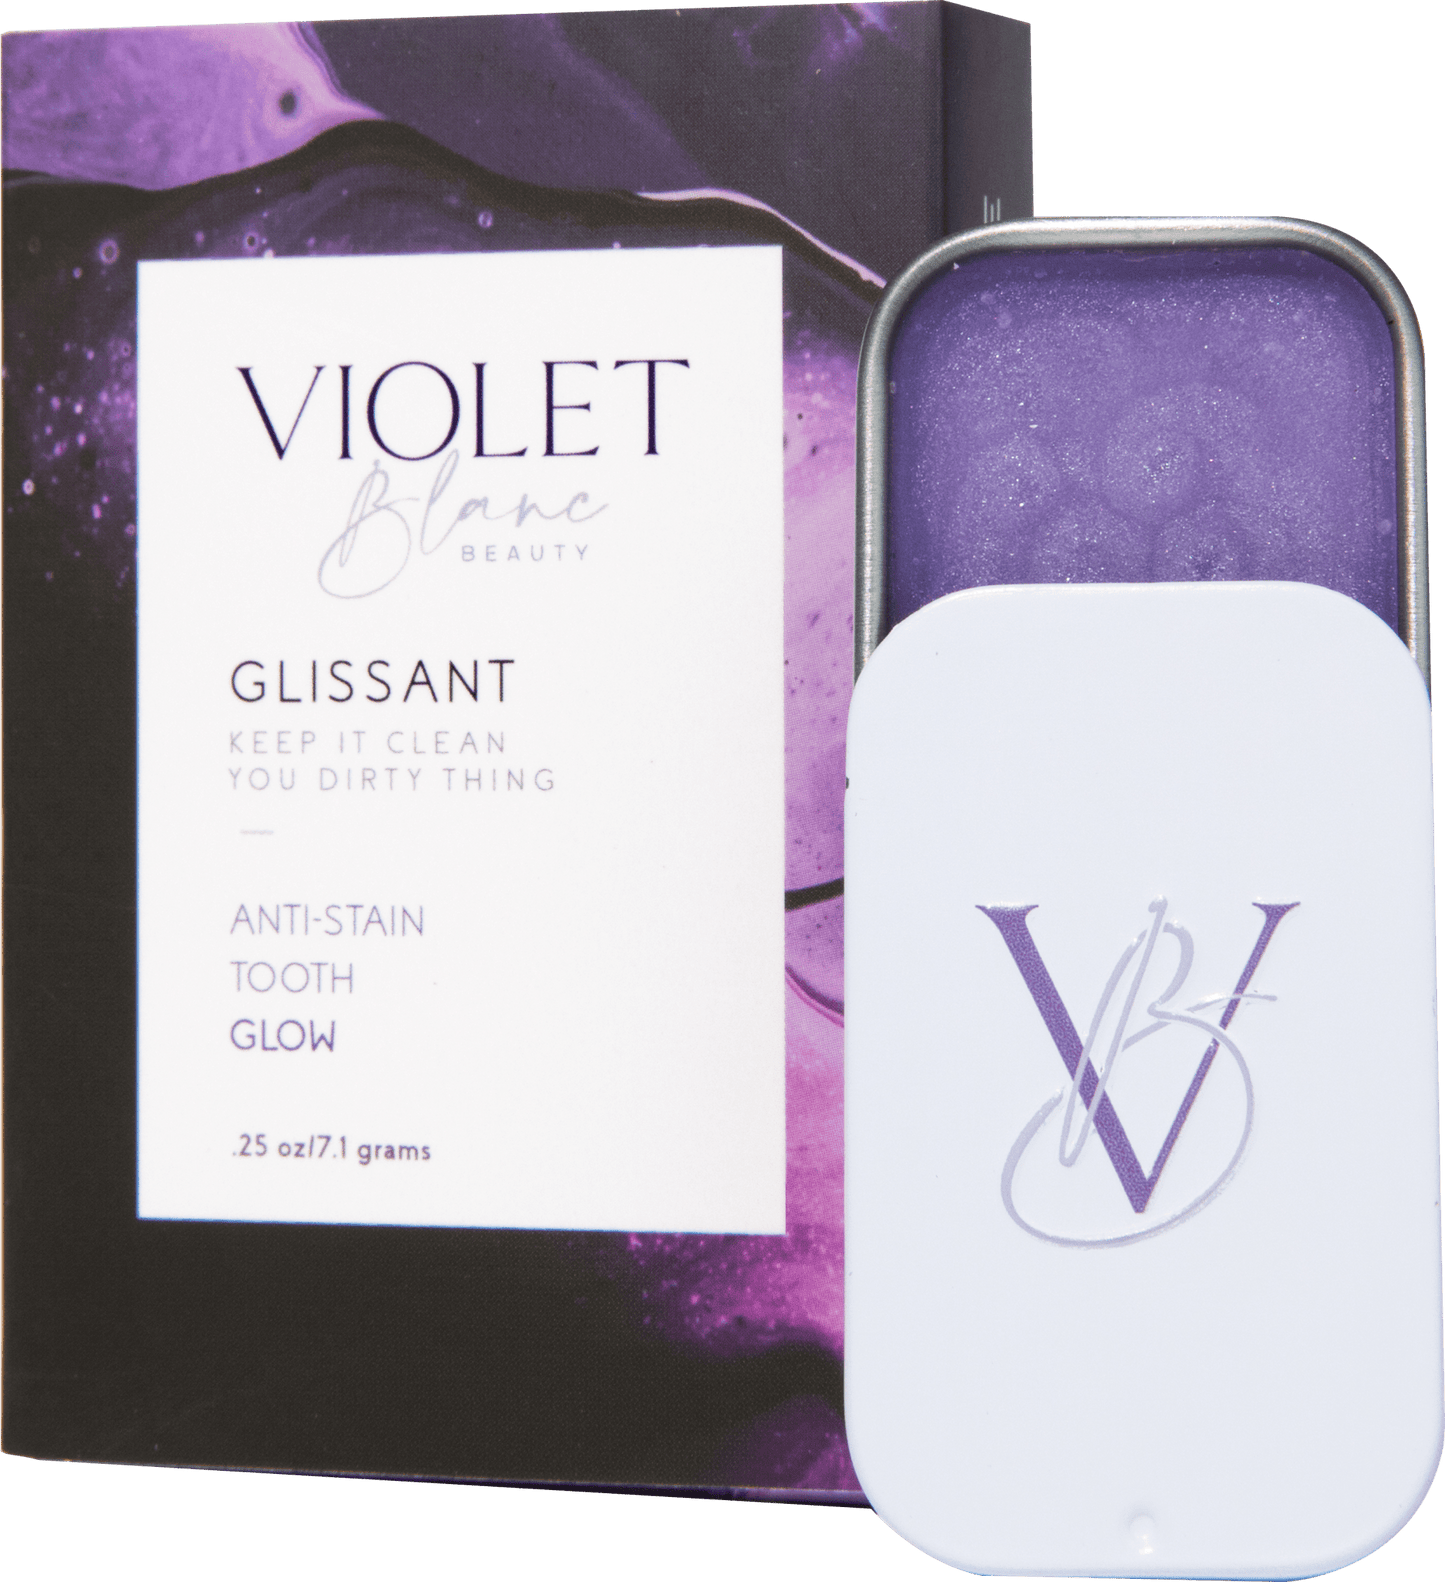 Glissant Anti-Stain Tooth Glow - Set of 2 - Violet Blanc Beauty